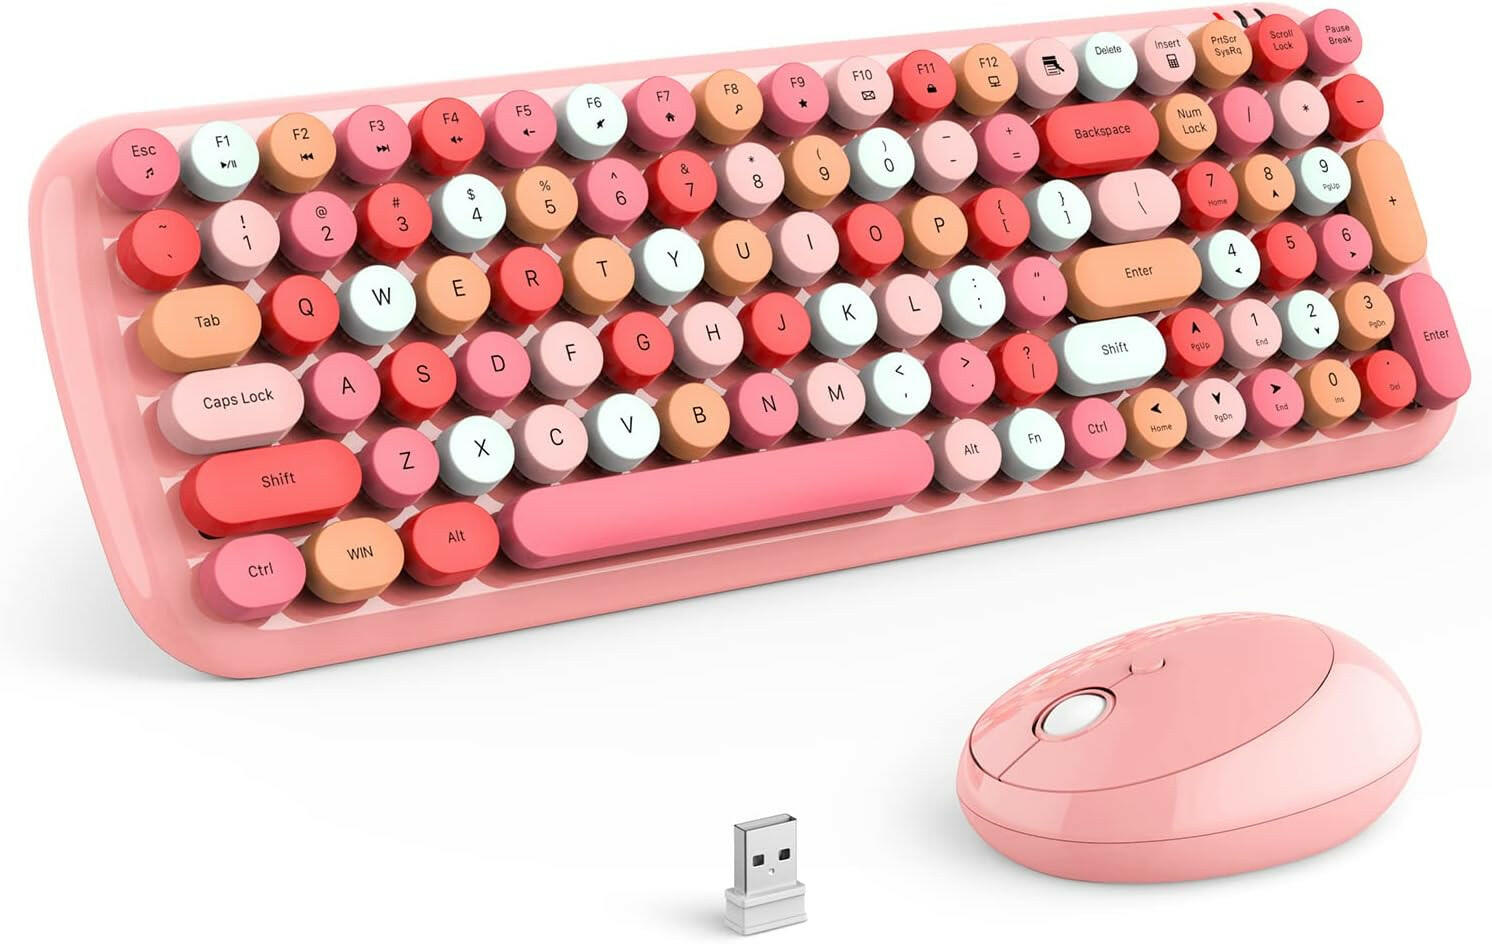 MOFII Wireless Keyboard and Mouse Combo - Pink - TapElf